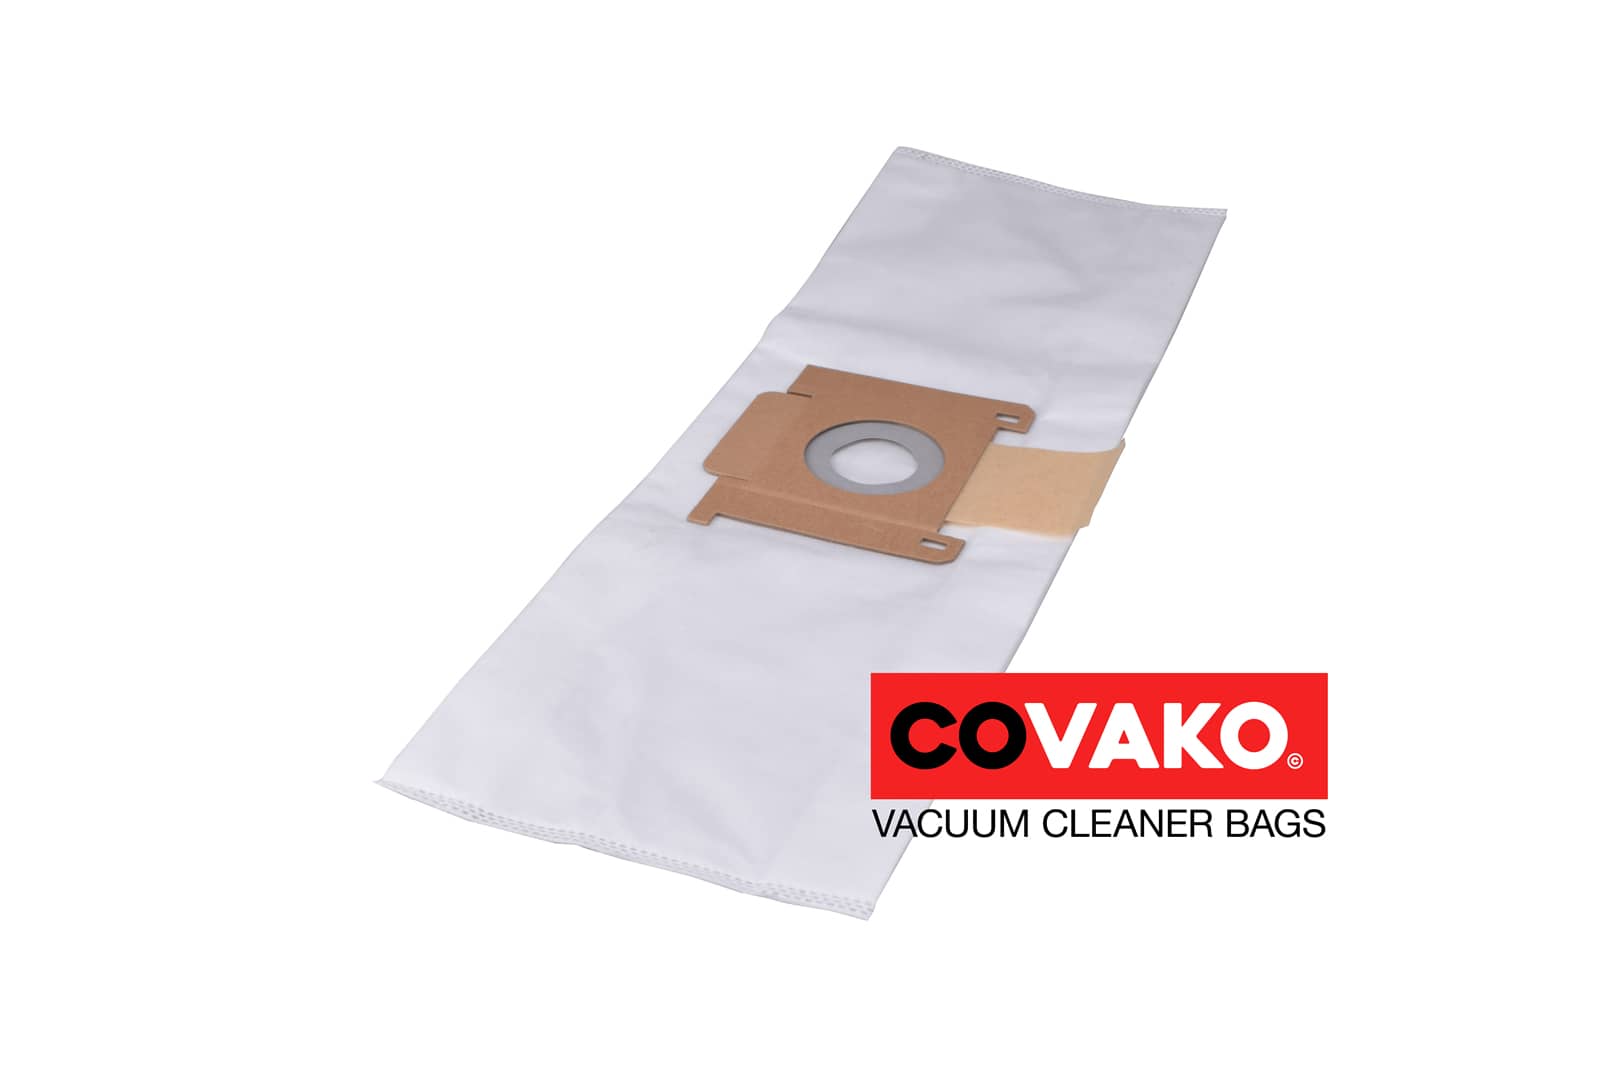 Ivac Compacto 6 / Synthesis - Ivac vacuum cleaner bags